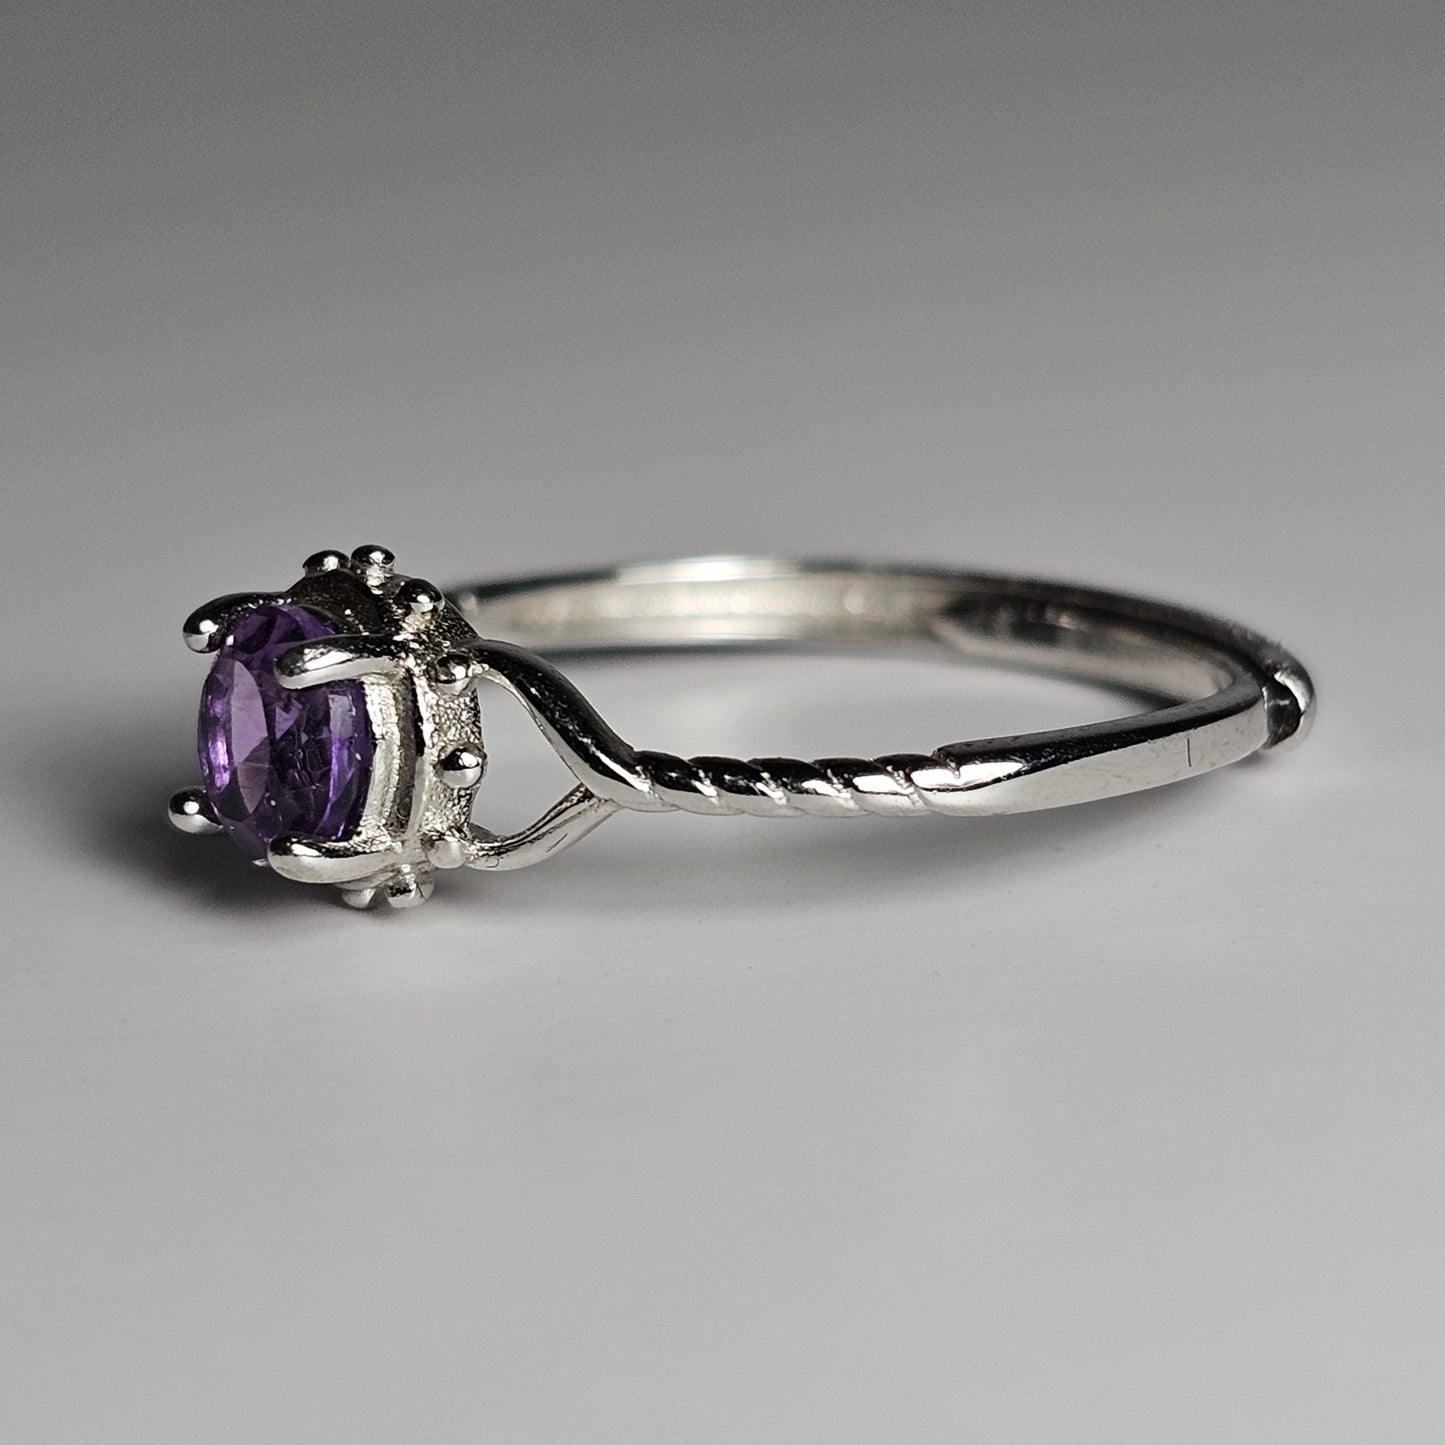 This adjustable fine ring is crafted from sterling silver and features a round Amethyst with heart and twist accented shoulder ring band.